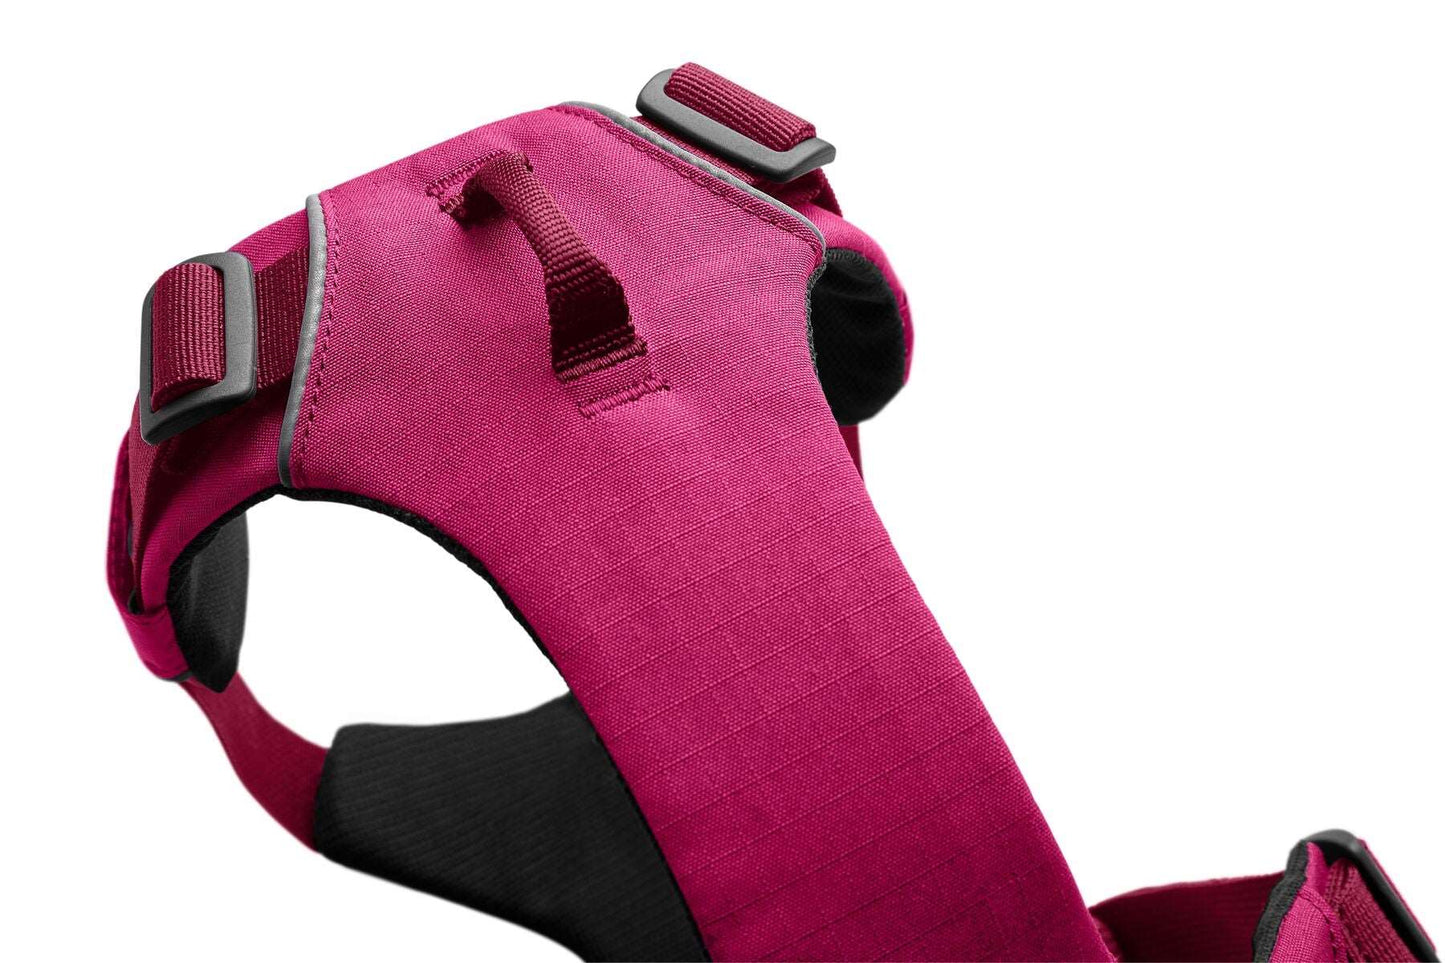 Ruffwear Front Range Dog Harness in Hibiscus Pink XXS, XS AND S